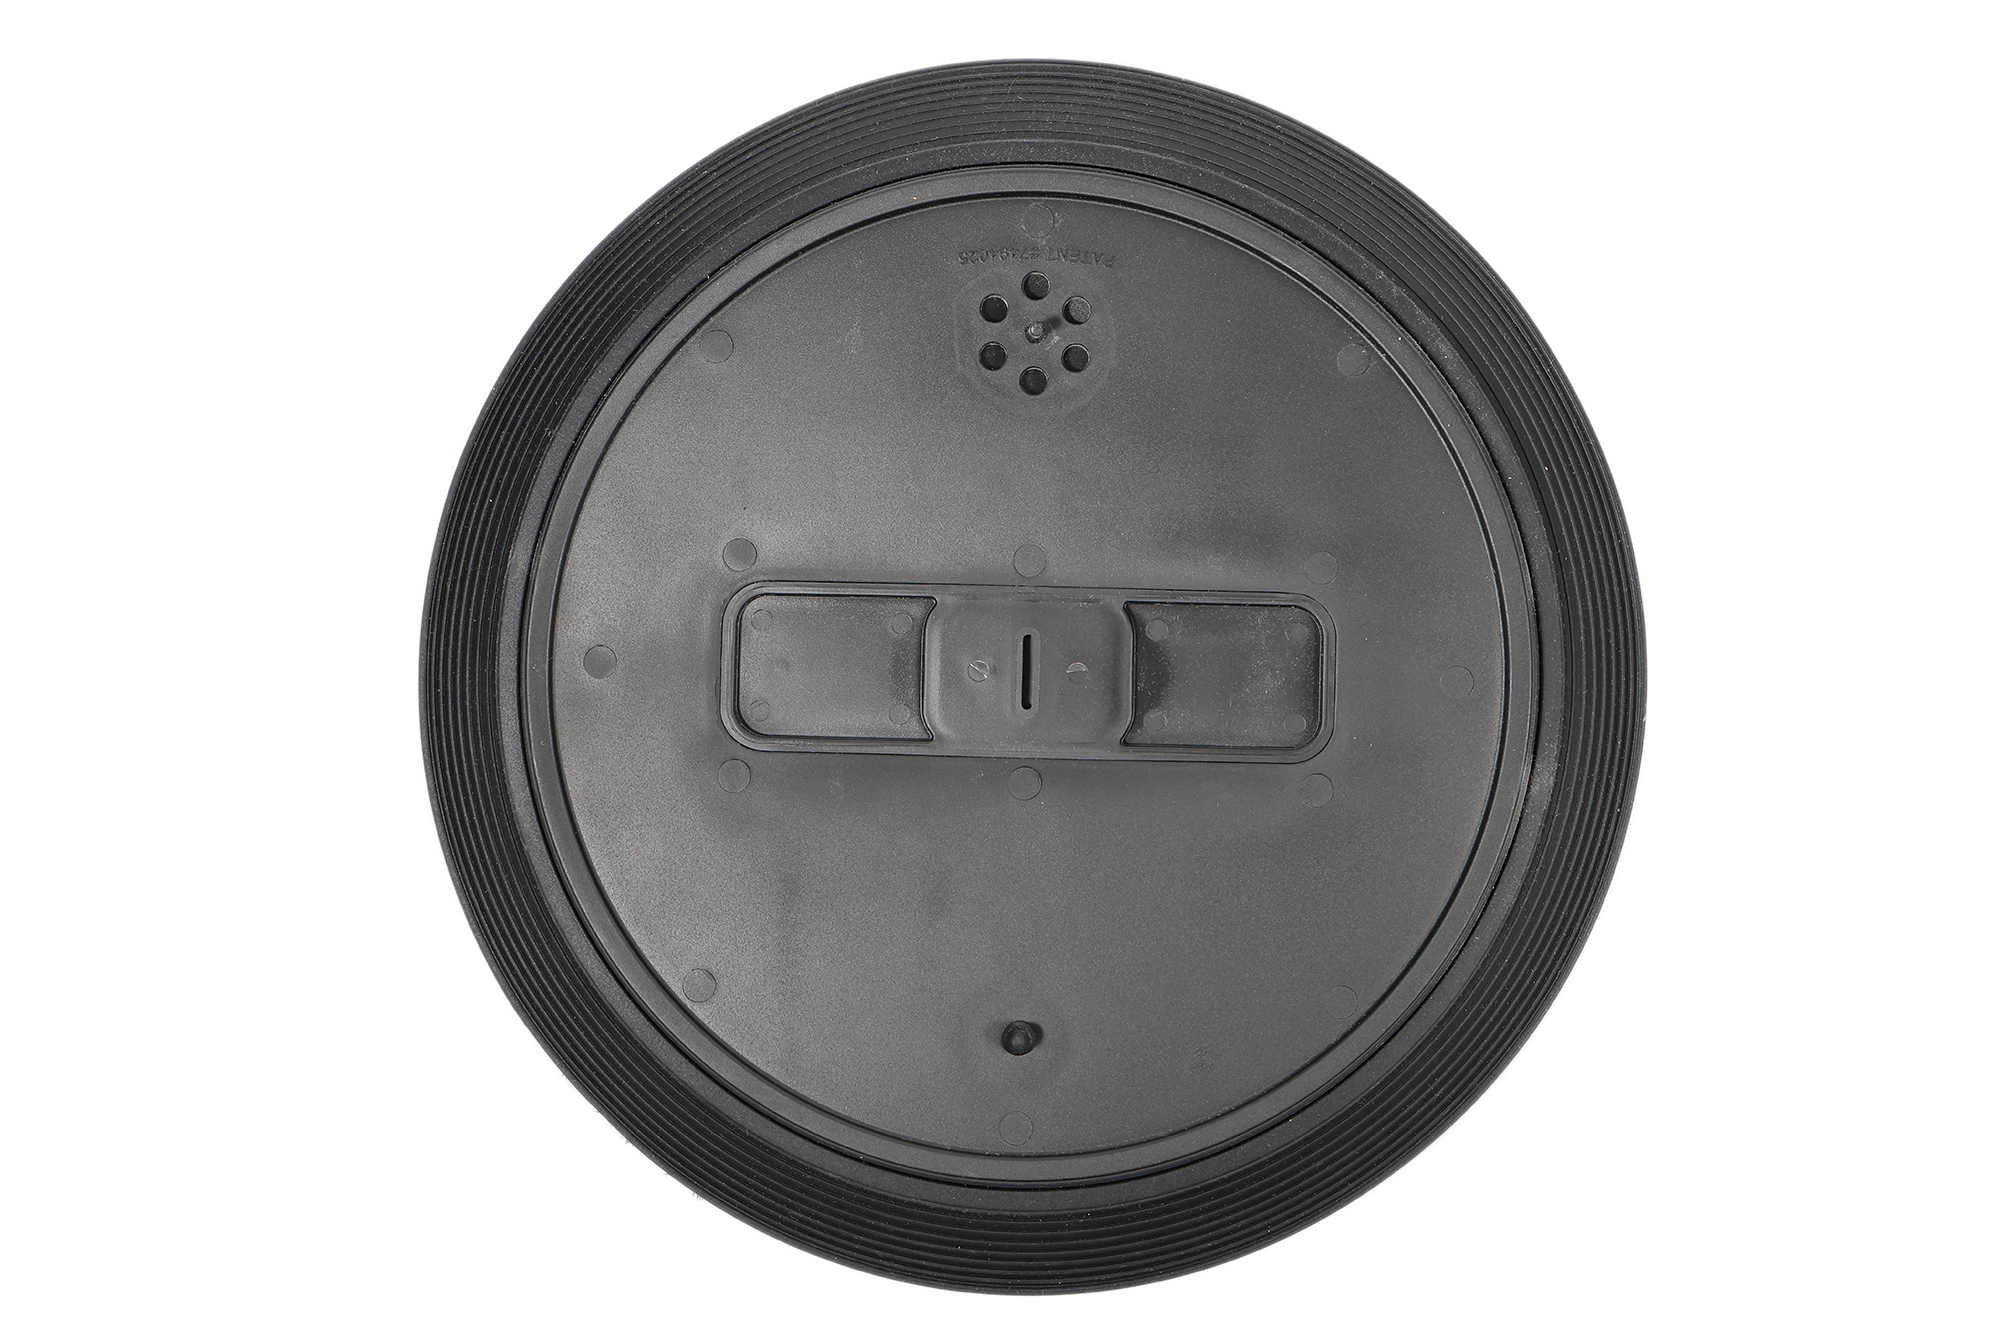 Airscape Bucket Lid Insert